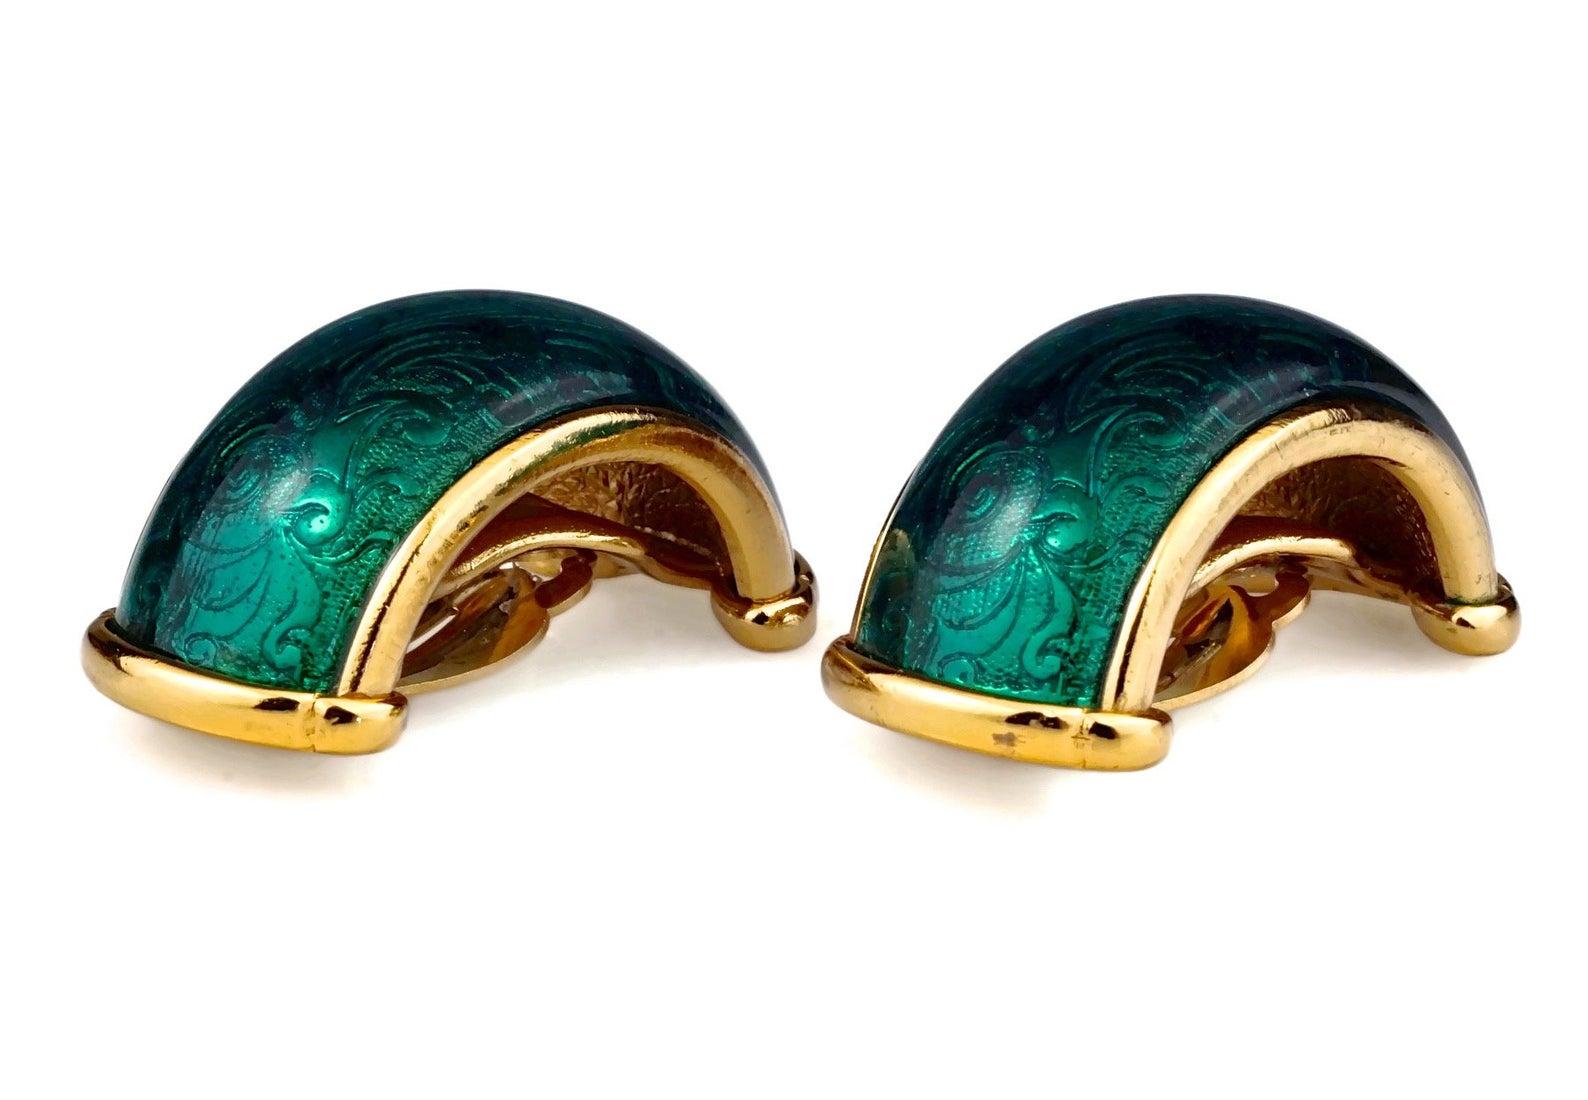 Vintage YVES SAINT LAURENT Ysl Arabesque Green Enamel Earrings

Measurements:
Height: 1.73 inches (4.4 cm)
Width: 0.83 inch (2.1 cm)
Weight per Earring: 26 grams

Features:
- 100% Authentic YVES SAINT LAURENT.
- Hoop earrings in green enamel with